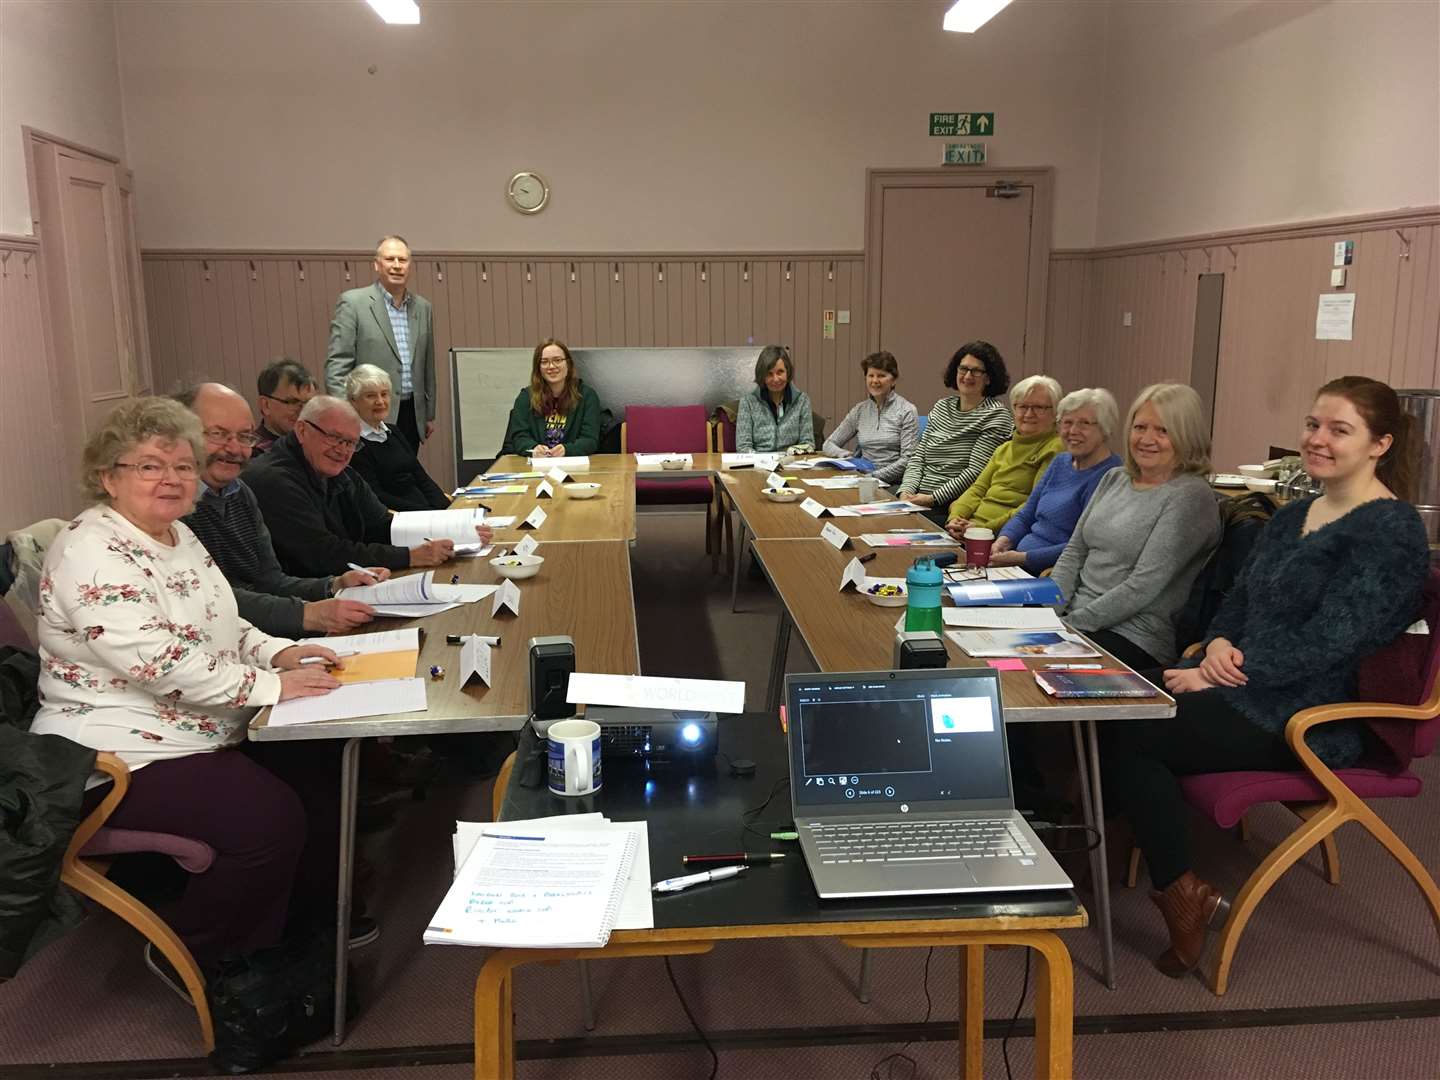 The volunteers from Forres Heritage Trust and Forres Area Community Trust who took part in the World Host Training.